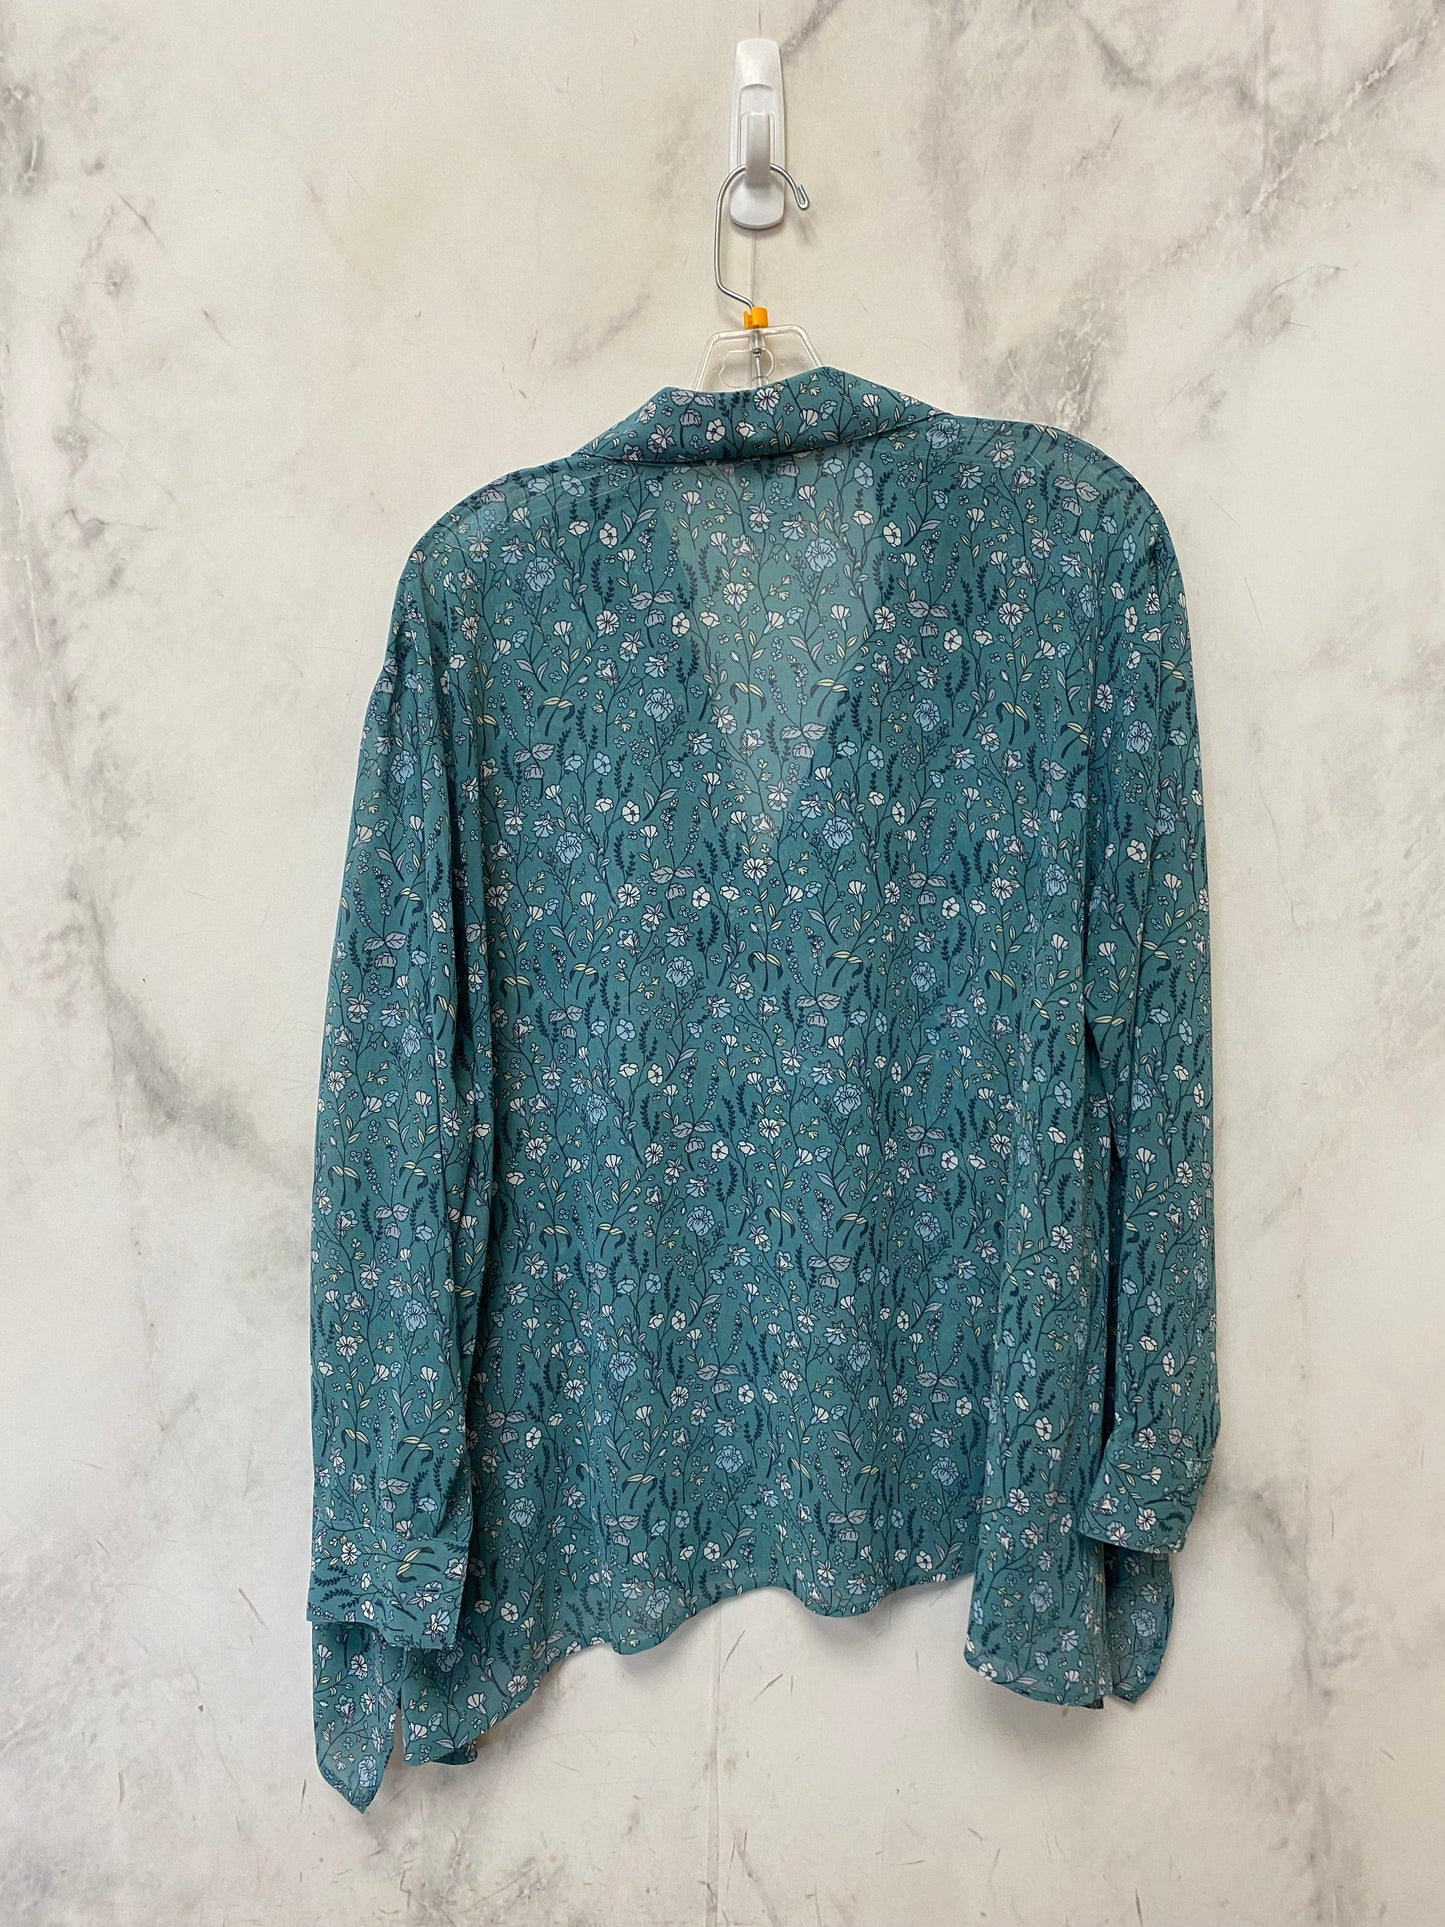 Floral Print Top Long Sleeve Cabi, Size S